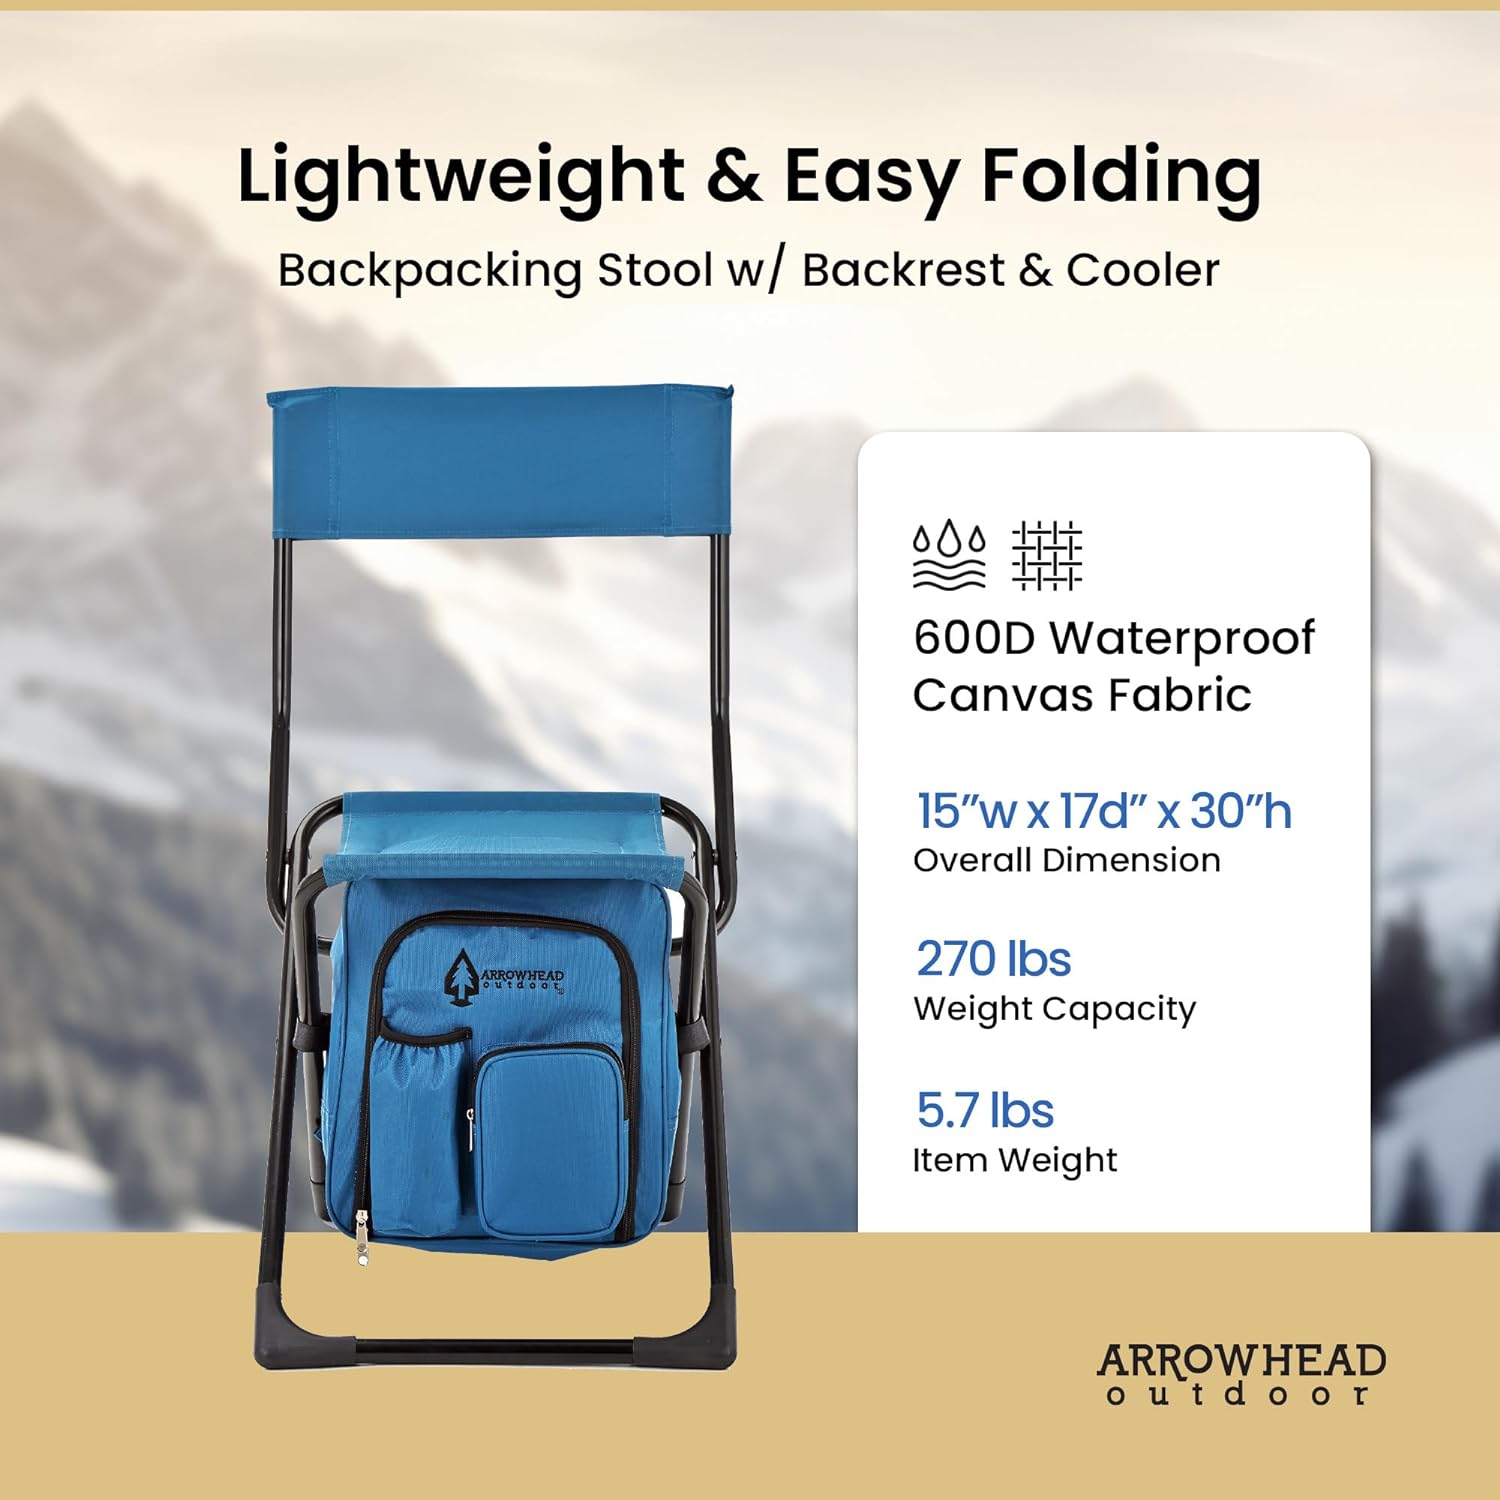 ARROWHEAD OUTDOOR Multi-Function 3-in-1 Compact Camp Chair: Backpack, Stool  & Insulated Cooler, w/ External Pockets & Storage Bag, Lightweight, Large